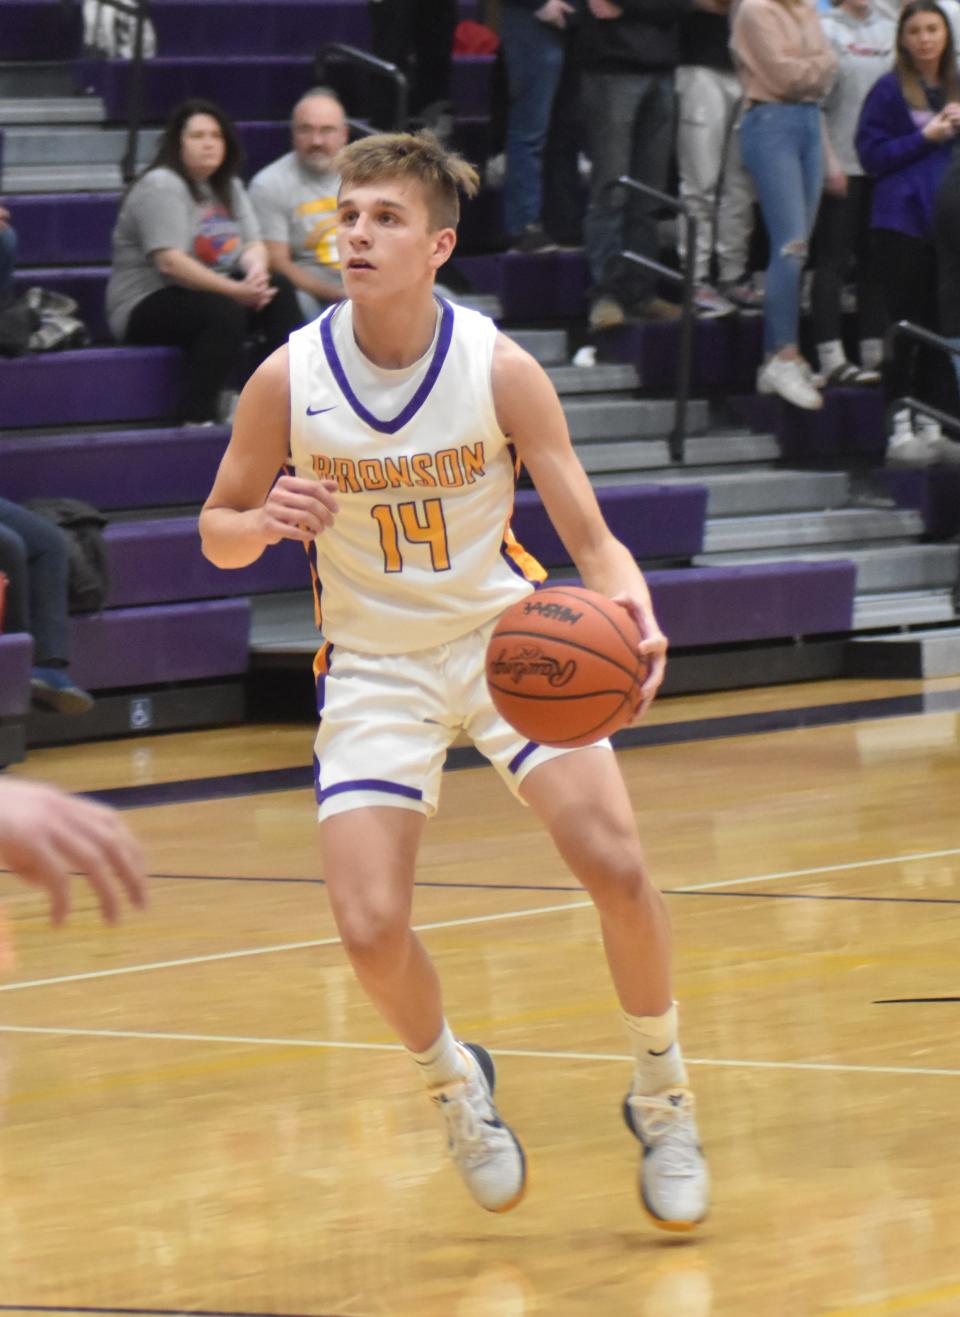 Bronson's Aden Hathaway poured in 29 points as the Vikings rolled past Reading Friday night for a Big 8 win